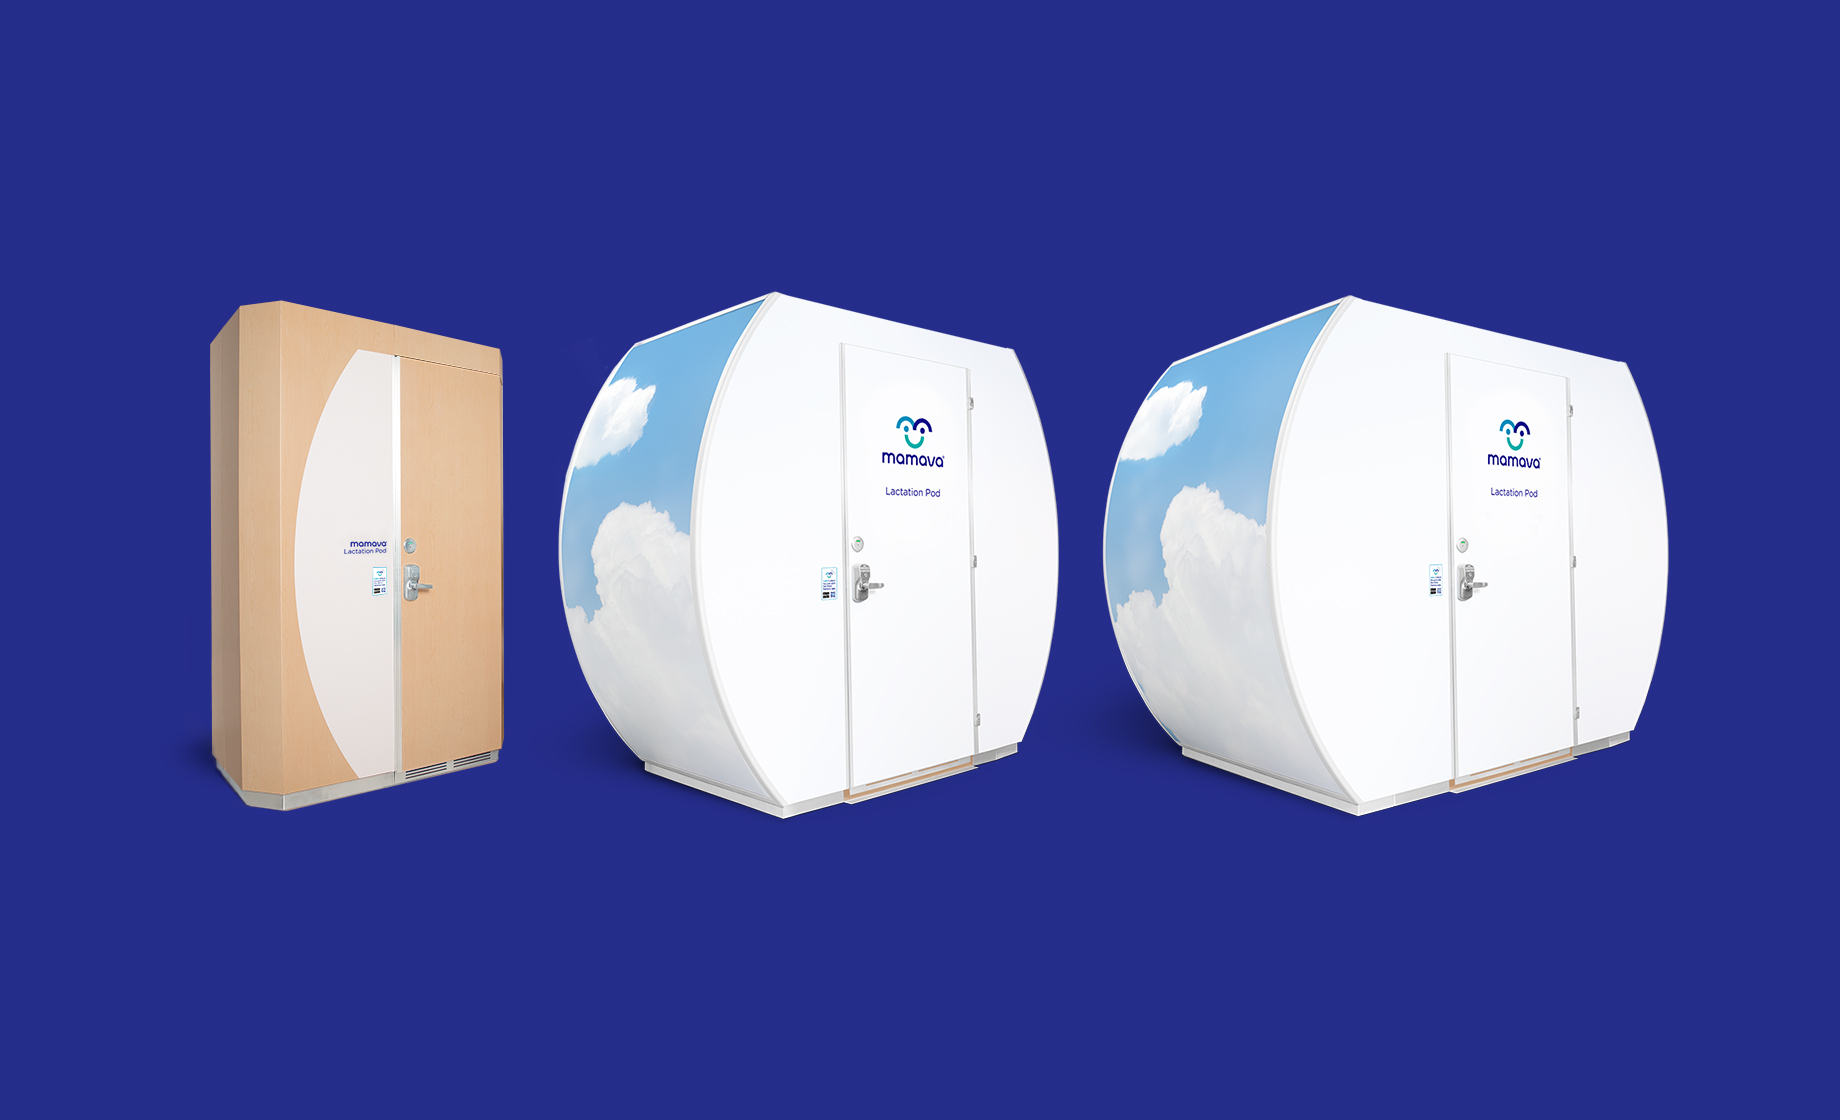 Mamava, the category creator of freestanding lactation spaces has announced a lactation pod giveaway contest to kick off August as National Breastfeeding Month. Finalists will be selected based on mission, need, and potential for breastfeeding impact. Pictured above is Mamava's product line that includes (L to R) the Mamava Solo, the Mamava Original and Mamava ADA pods. 